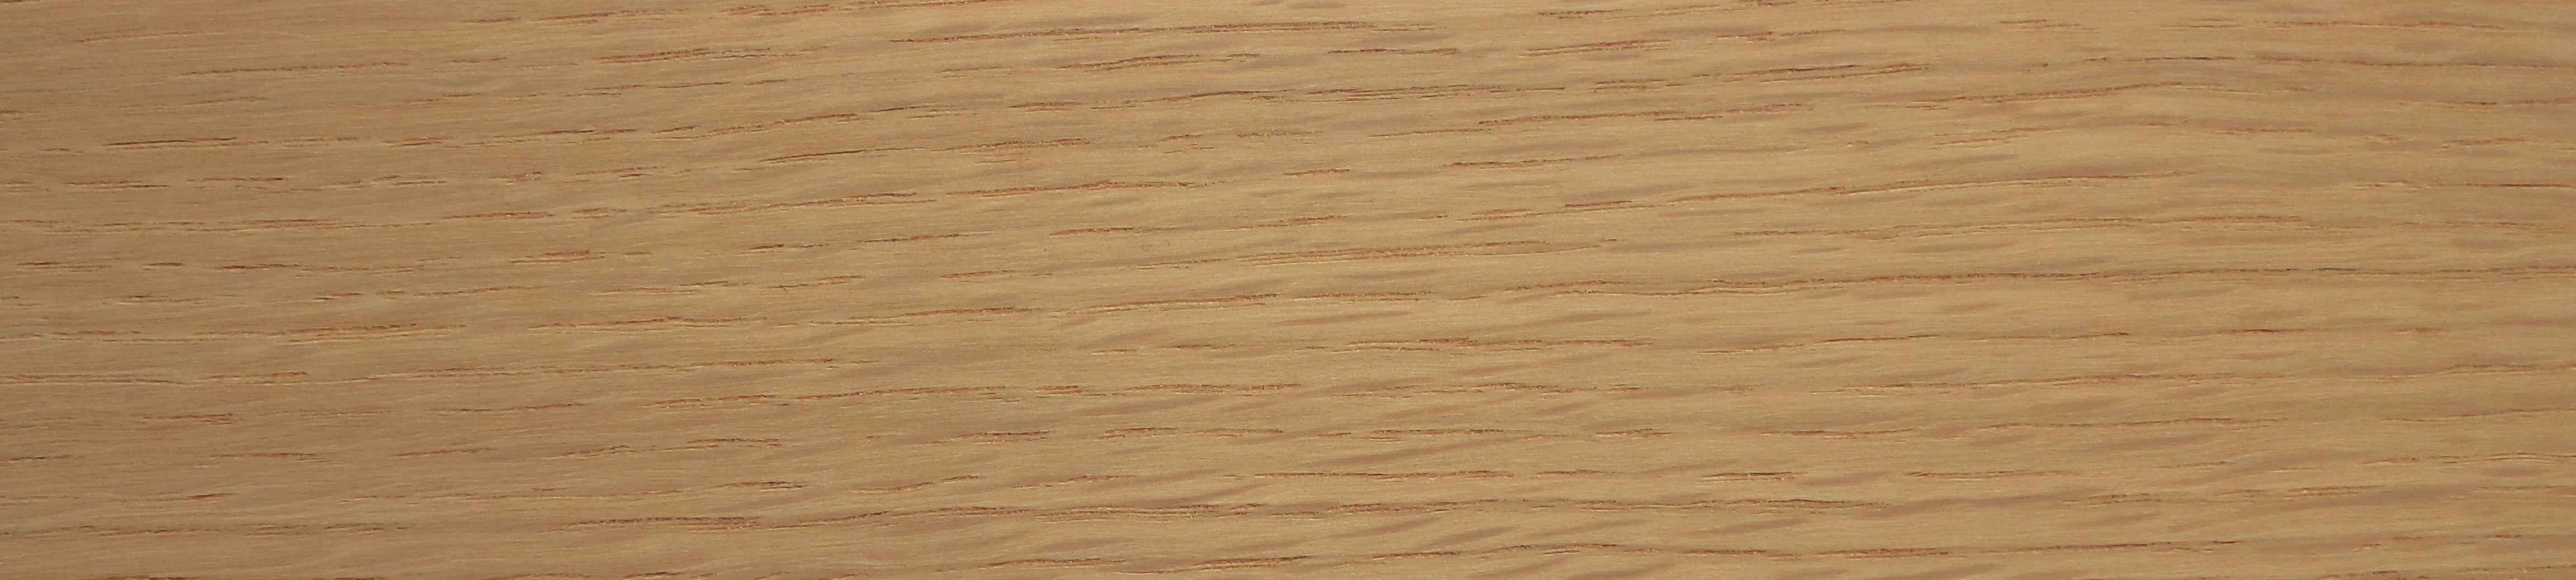 American White Oak Thickwood Unglued Edging / Lipping 1mm Thick Oak Wood Edging: Various Widths